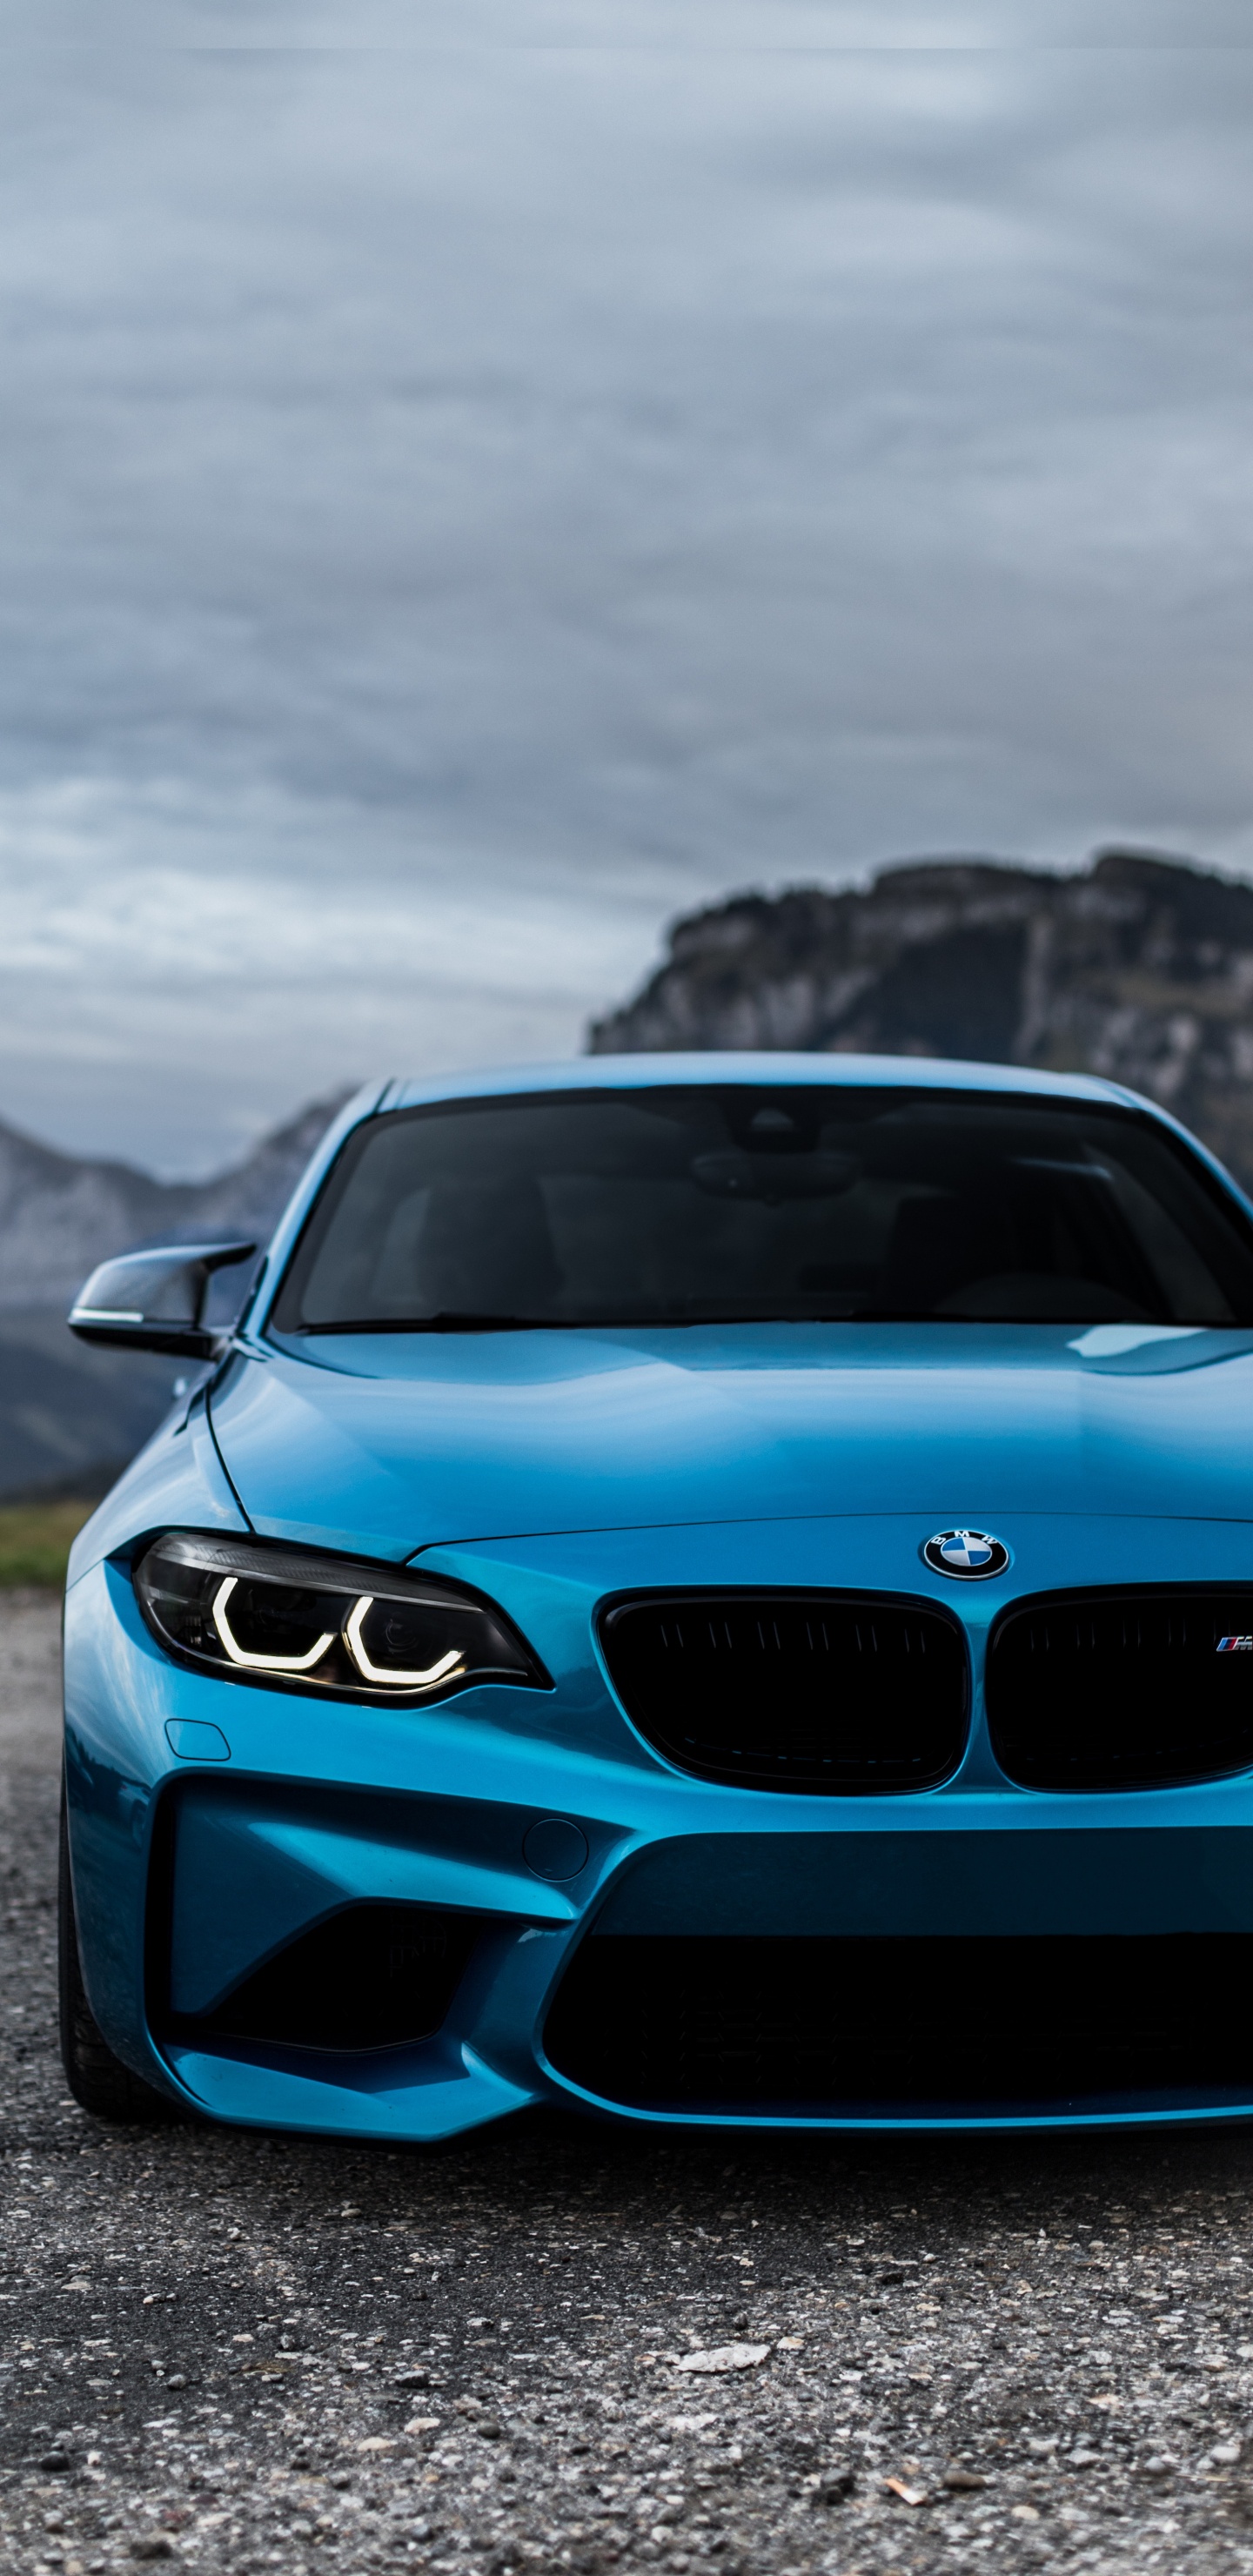 Blue Bmw m 3 on Road During Daytime. Wallpaper in 1440x2960 Resolution